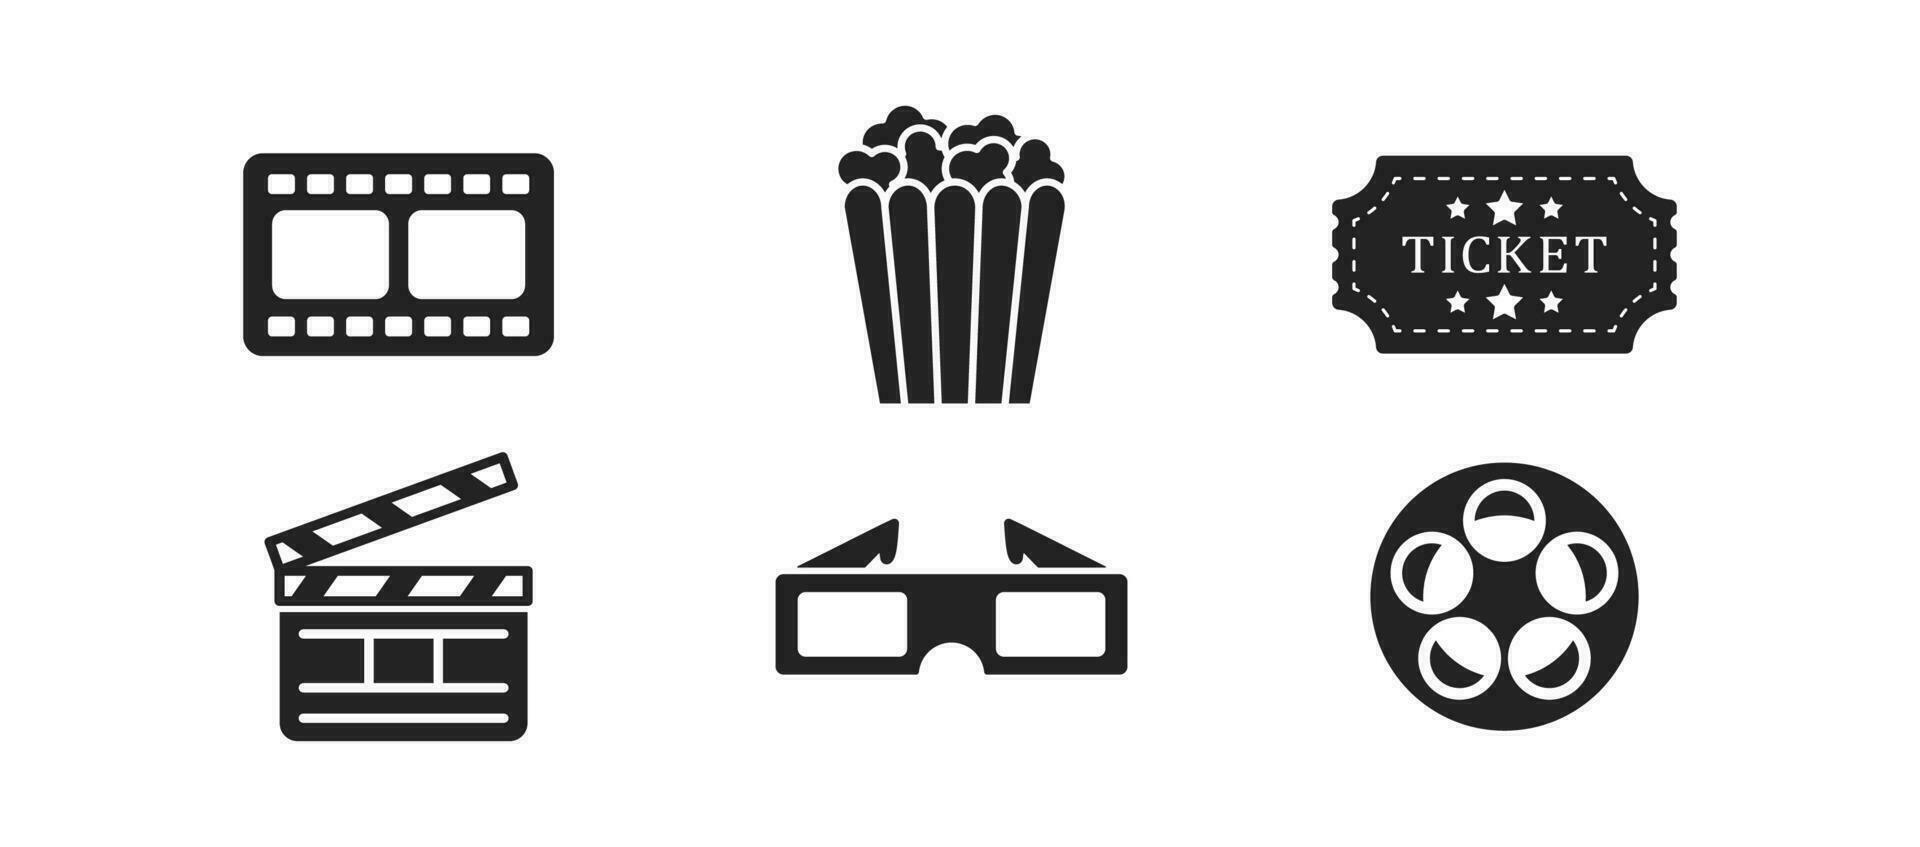 Watching movie icon set on white background. Weekend, leisure concept. Retro style ticket, moviestrip. Media entertainment symbol. Isolated black pictogram design. vector